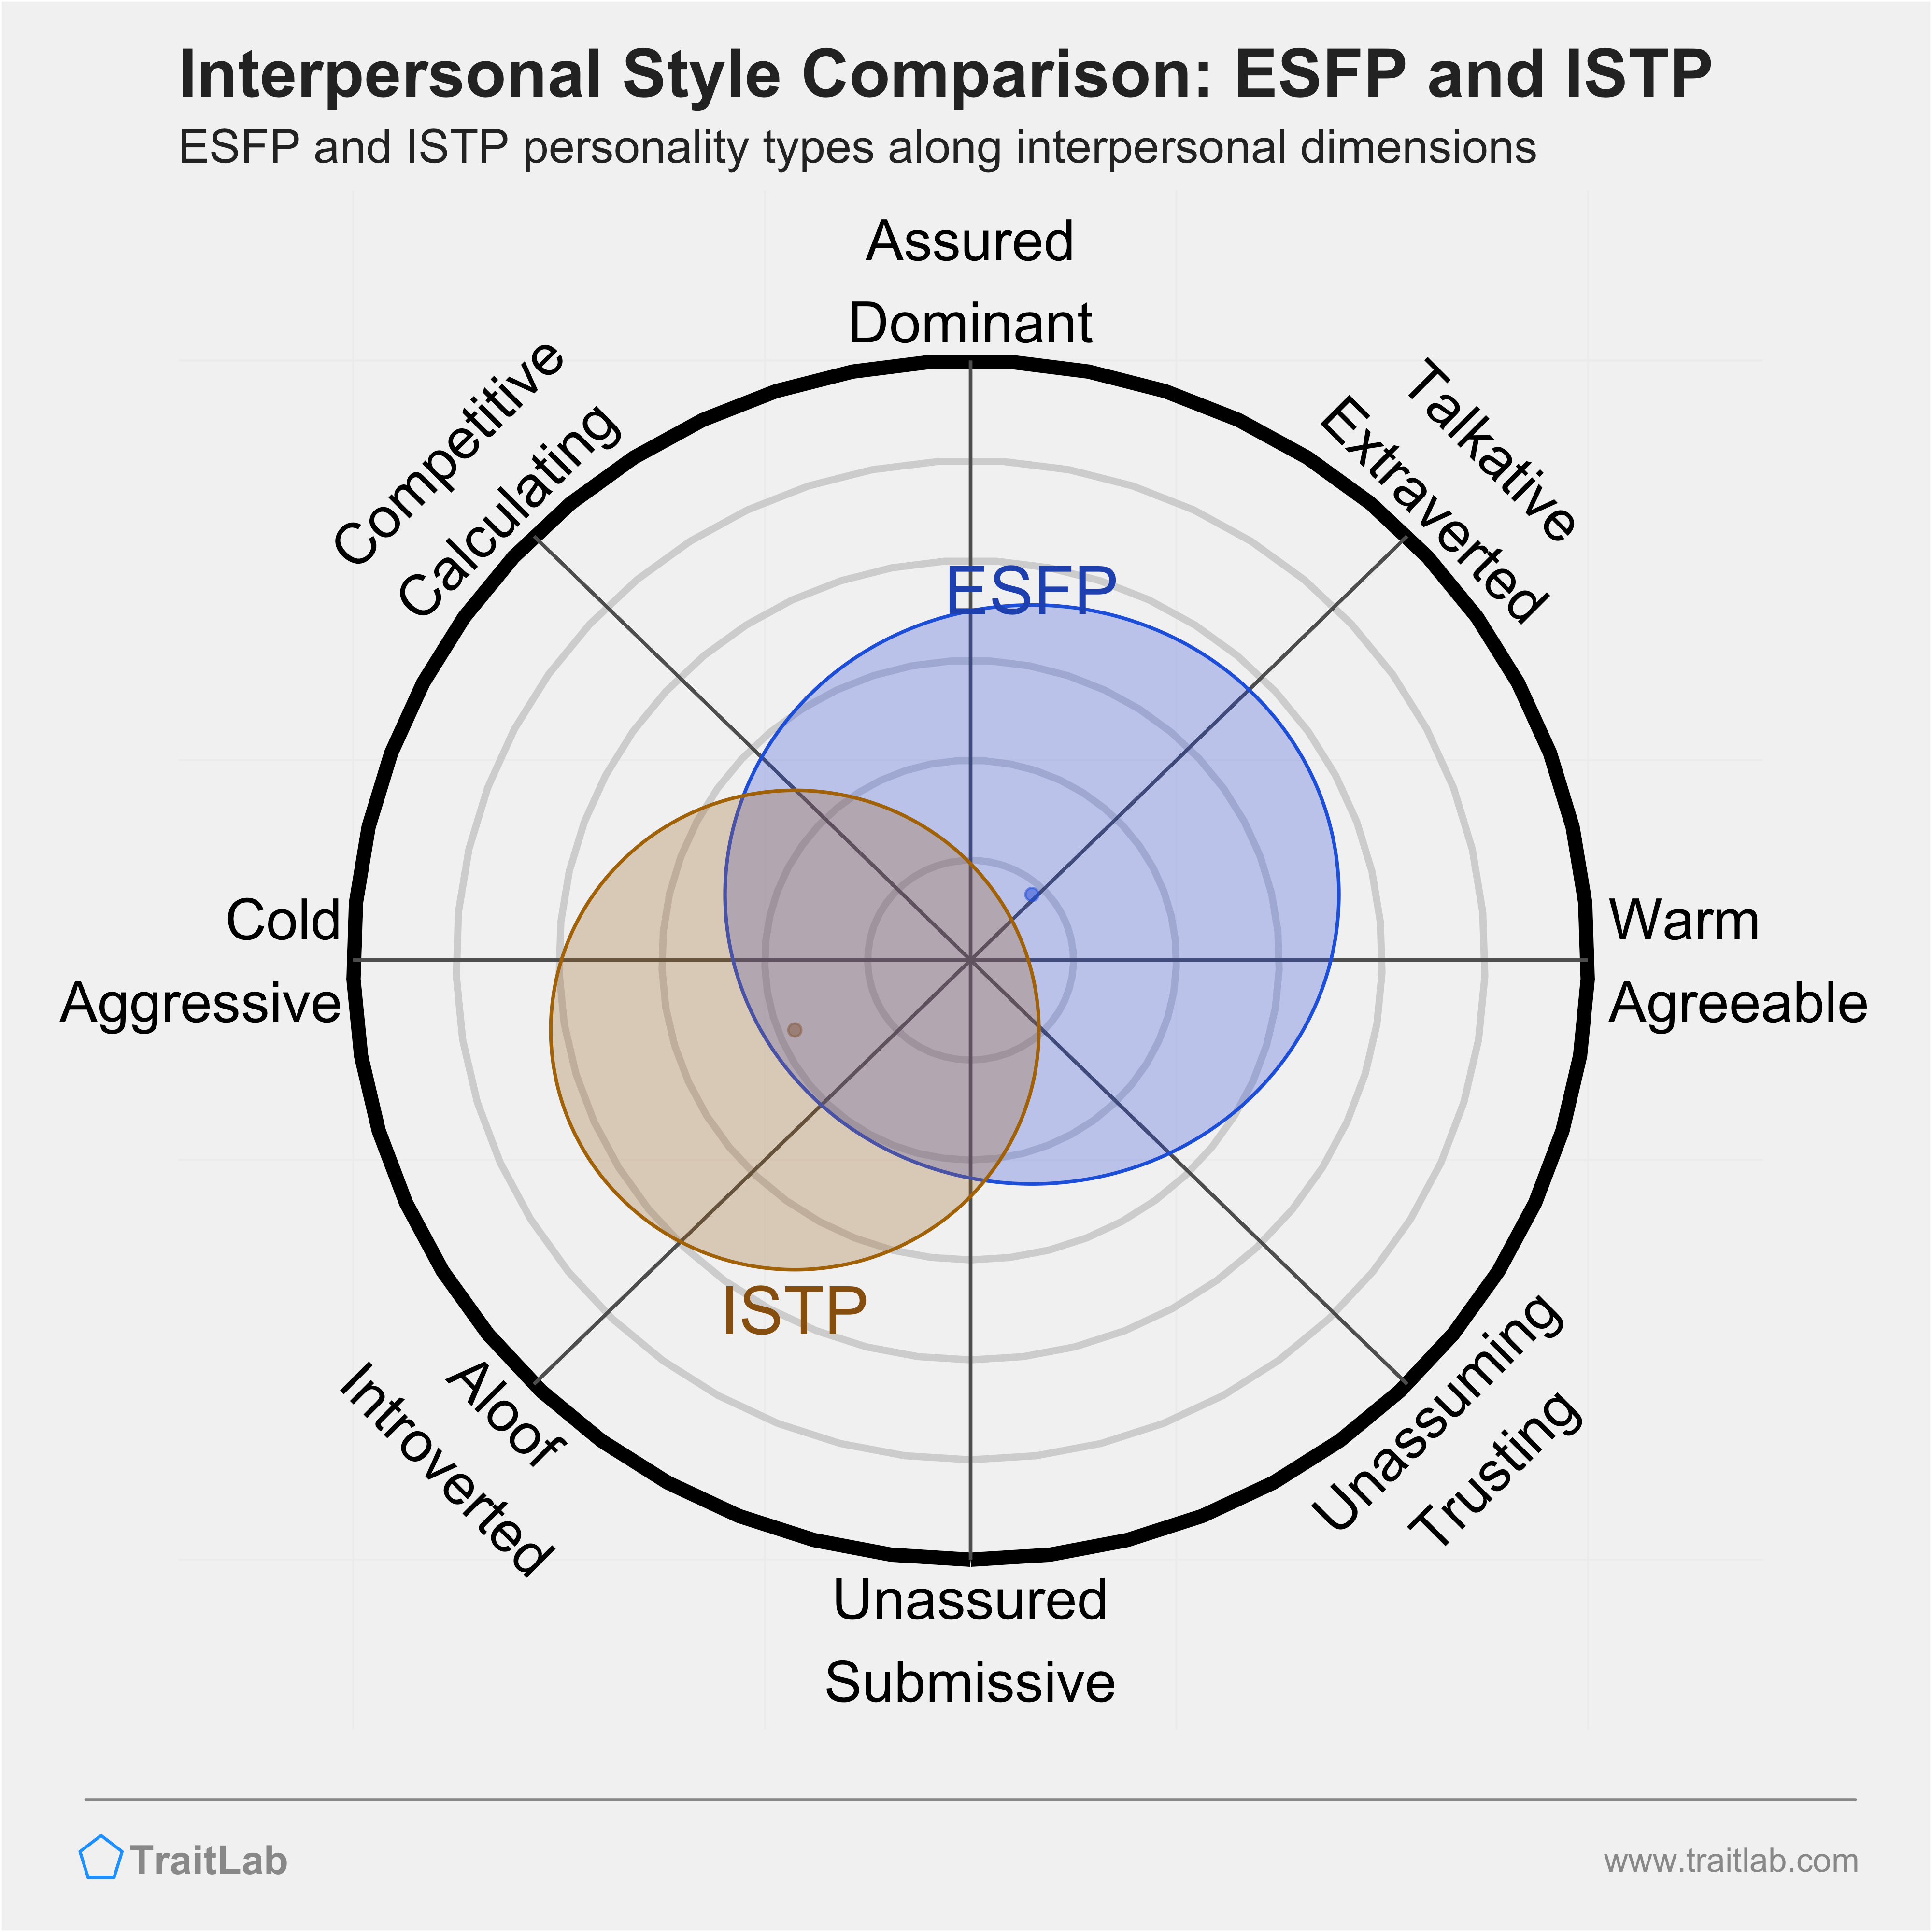 ESFP and ISTP comparison across interpersonal dimensions